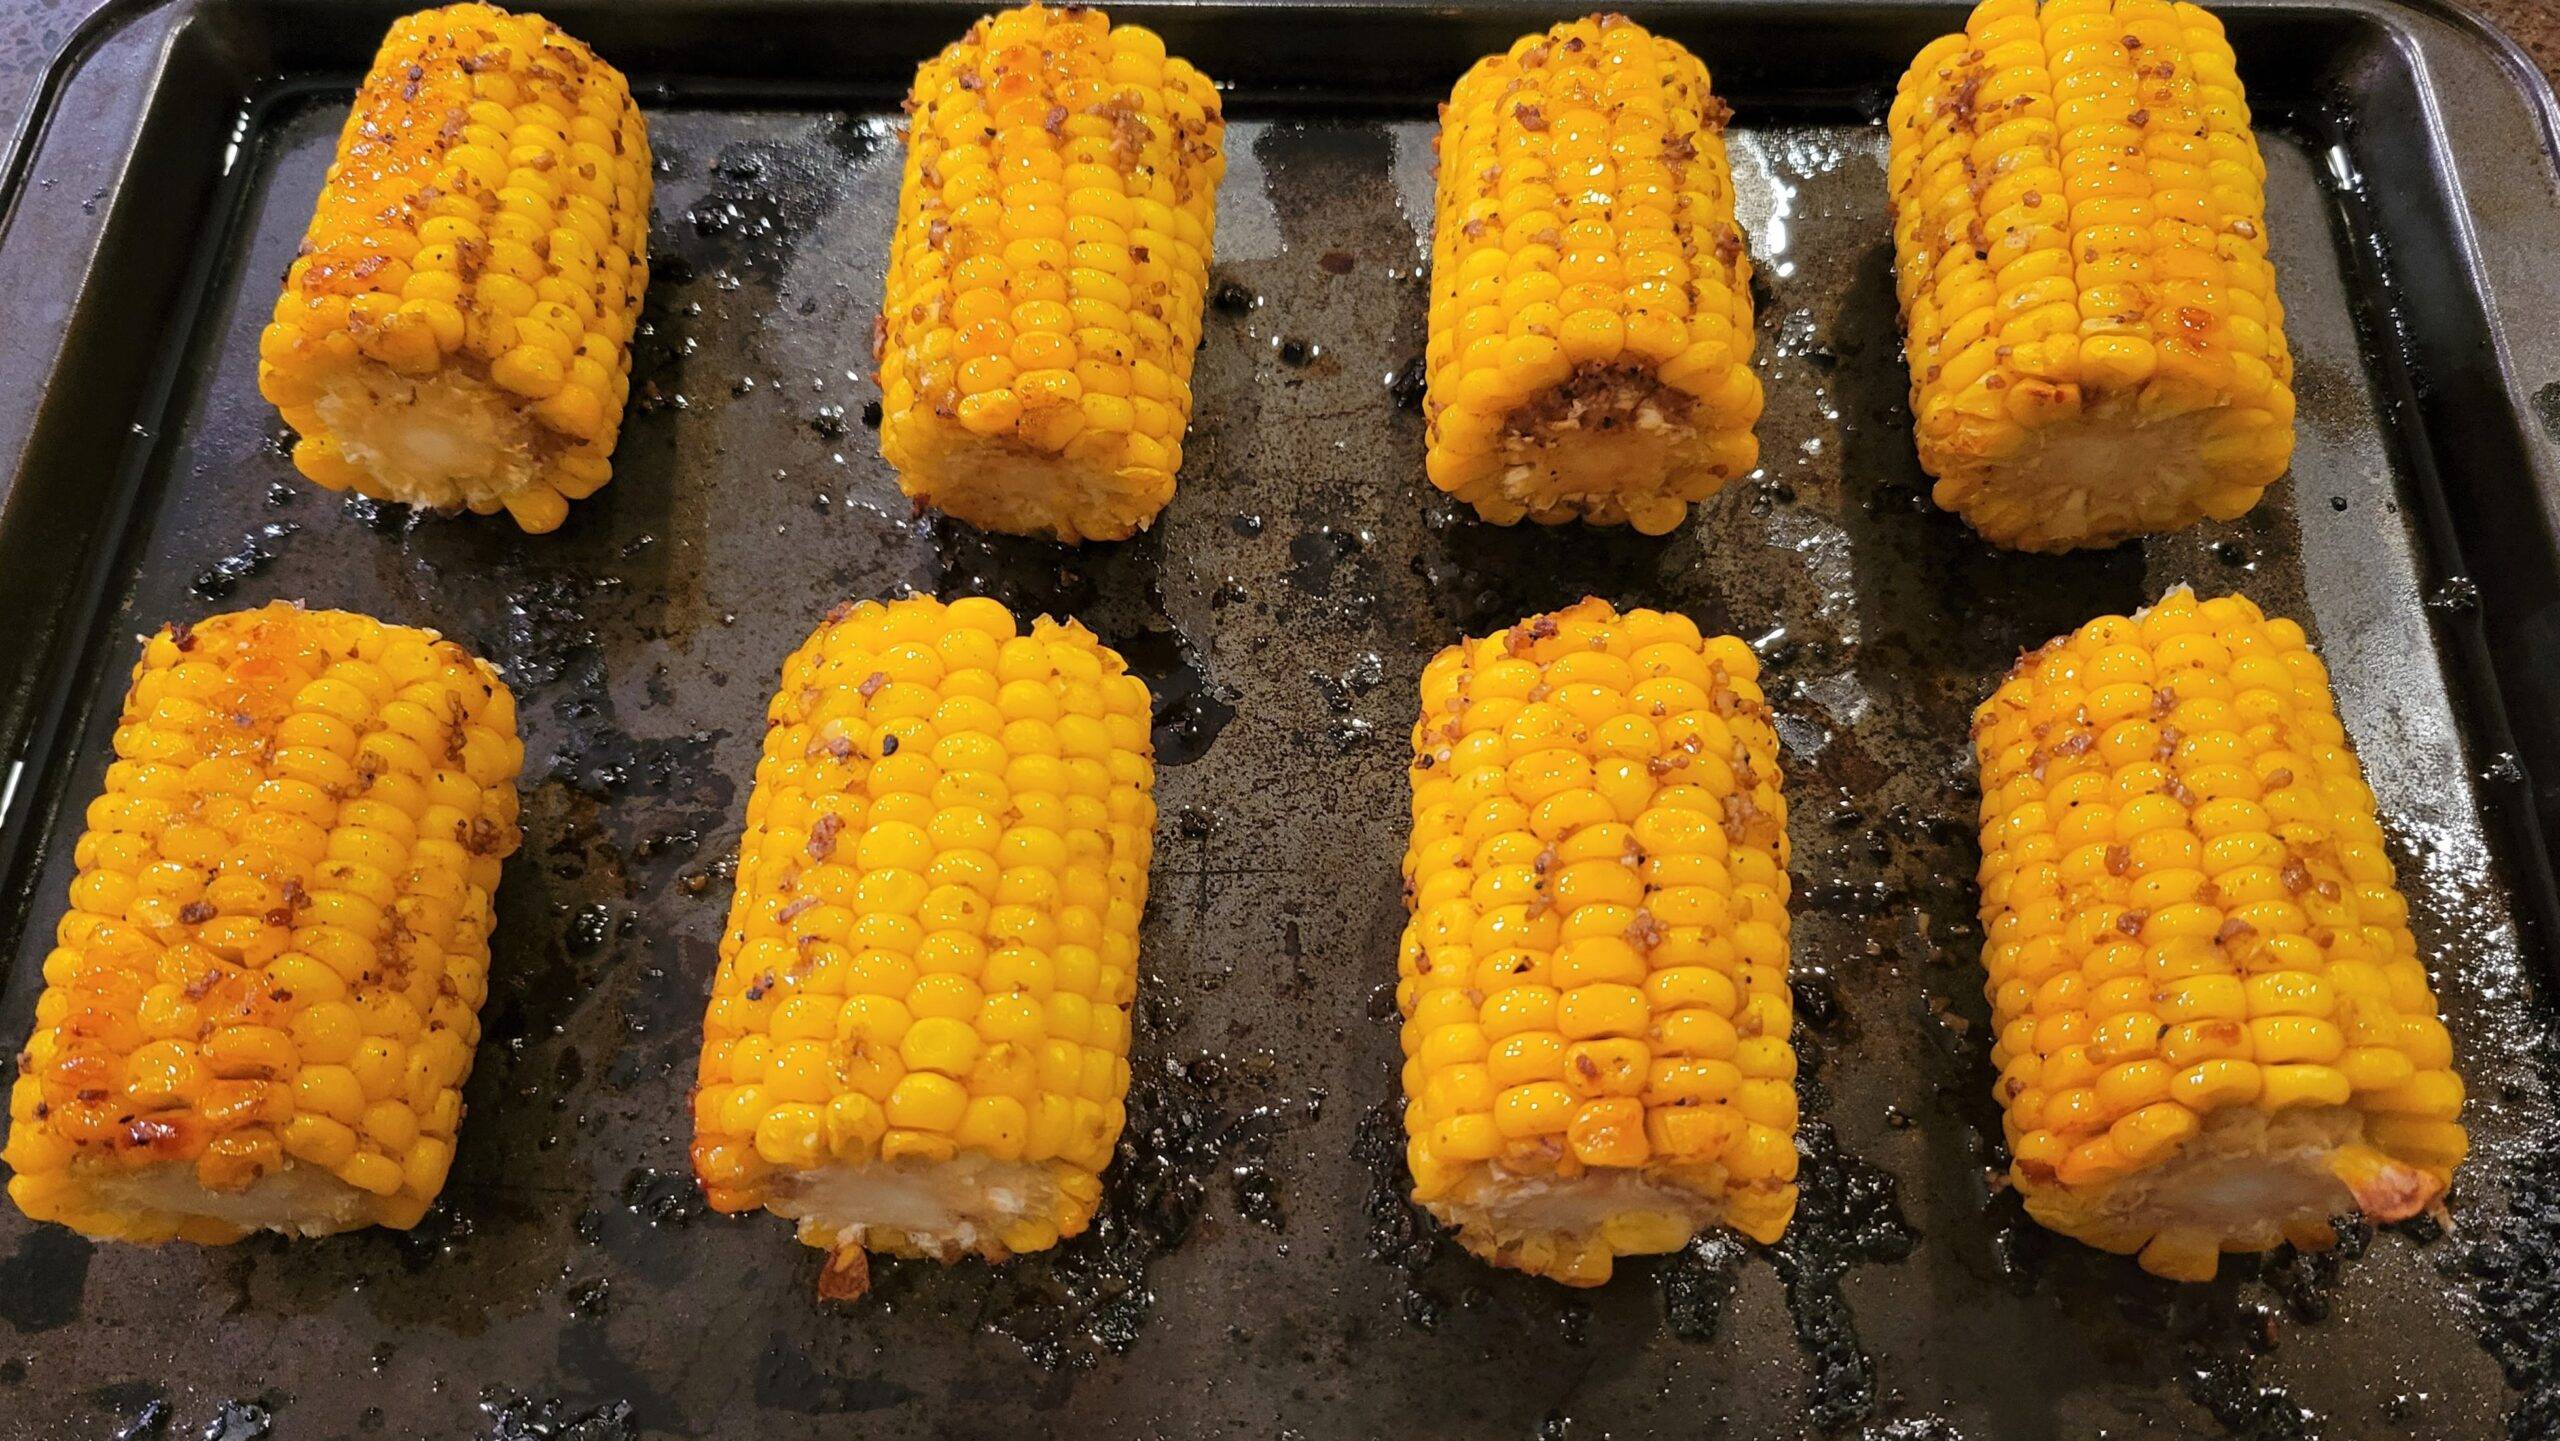 Frozen corn on the cob - Dining in with Danielle